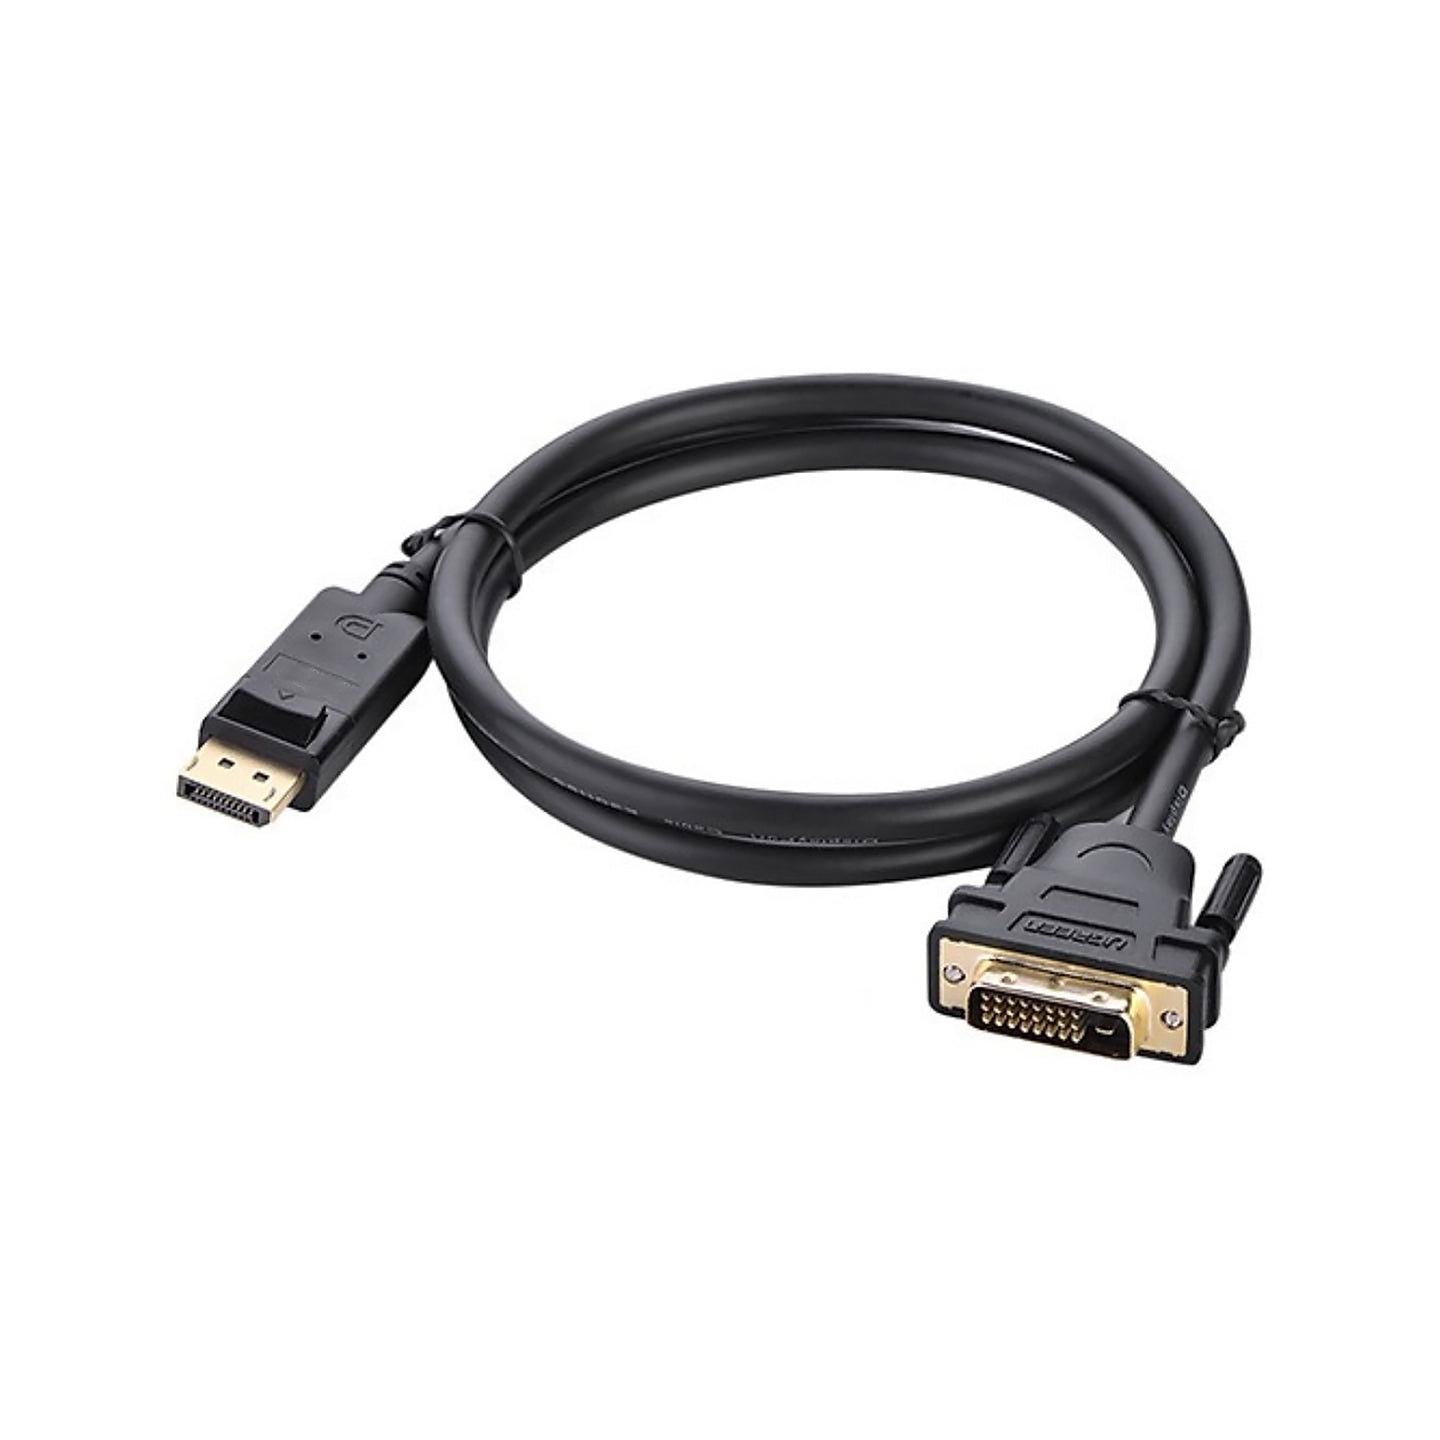 UGREEN 1080P 60Hz DisplayPort DP Male to DVI (24+1) Male Gold-Plated Cable Connector with Button Design, Multiple Internal Shielding for Laptop, Graphics Card, HDTV (1.5M, 2M) | 10243 10221